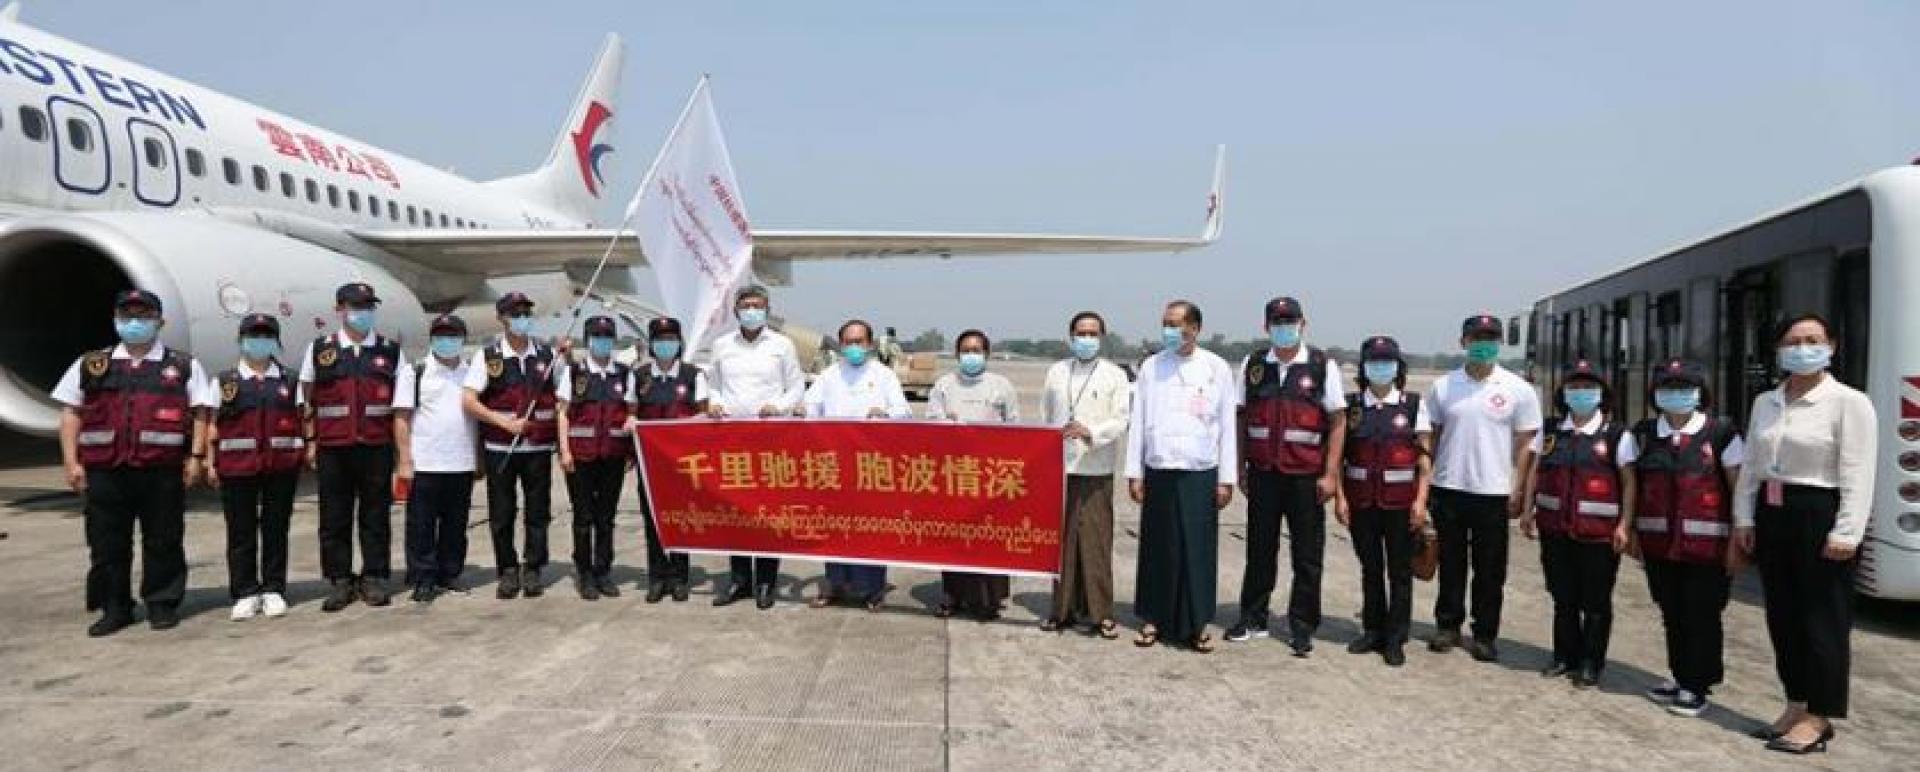 The Chinese medical expert team arrived at Yangon International Airport on 8 April. (Photo-Chinese Embassy in Myanmar)